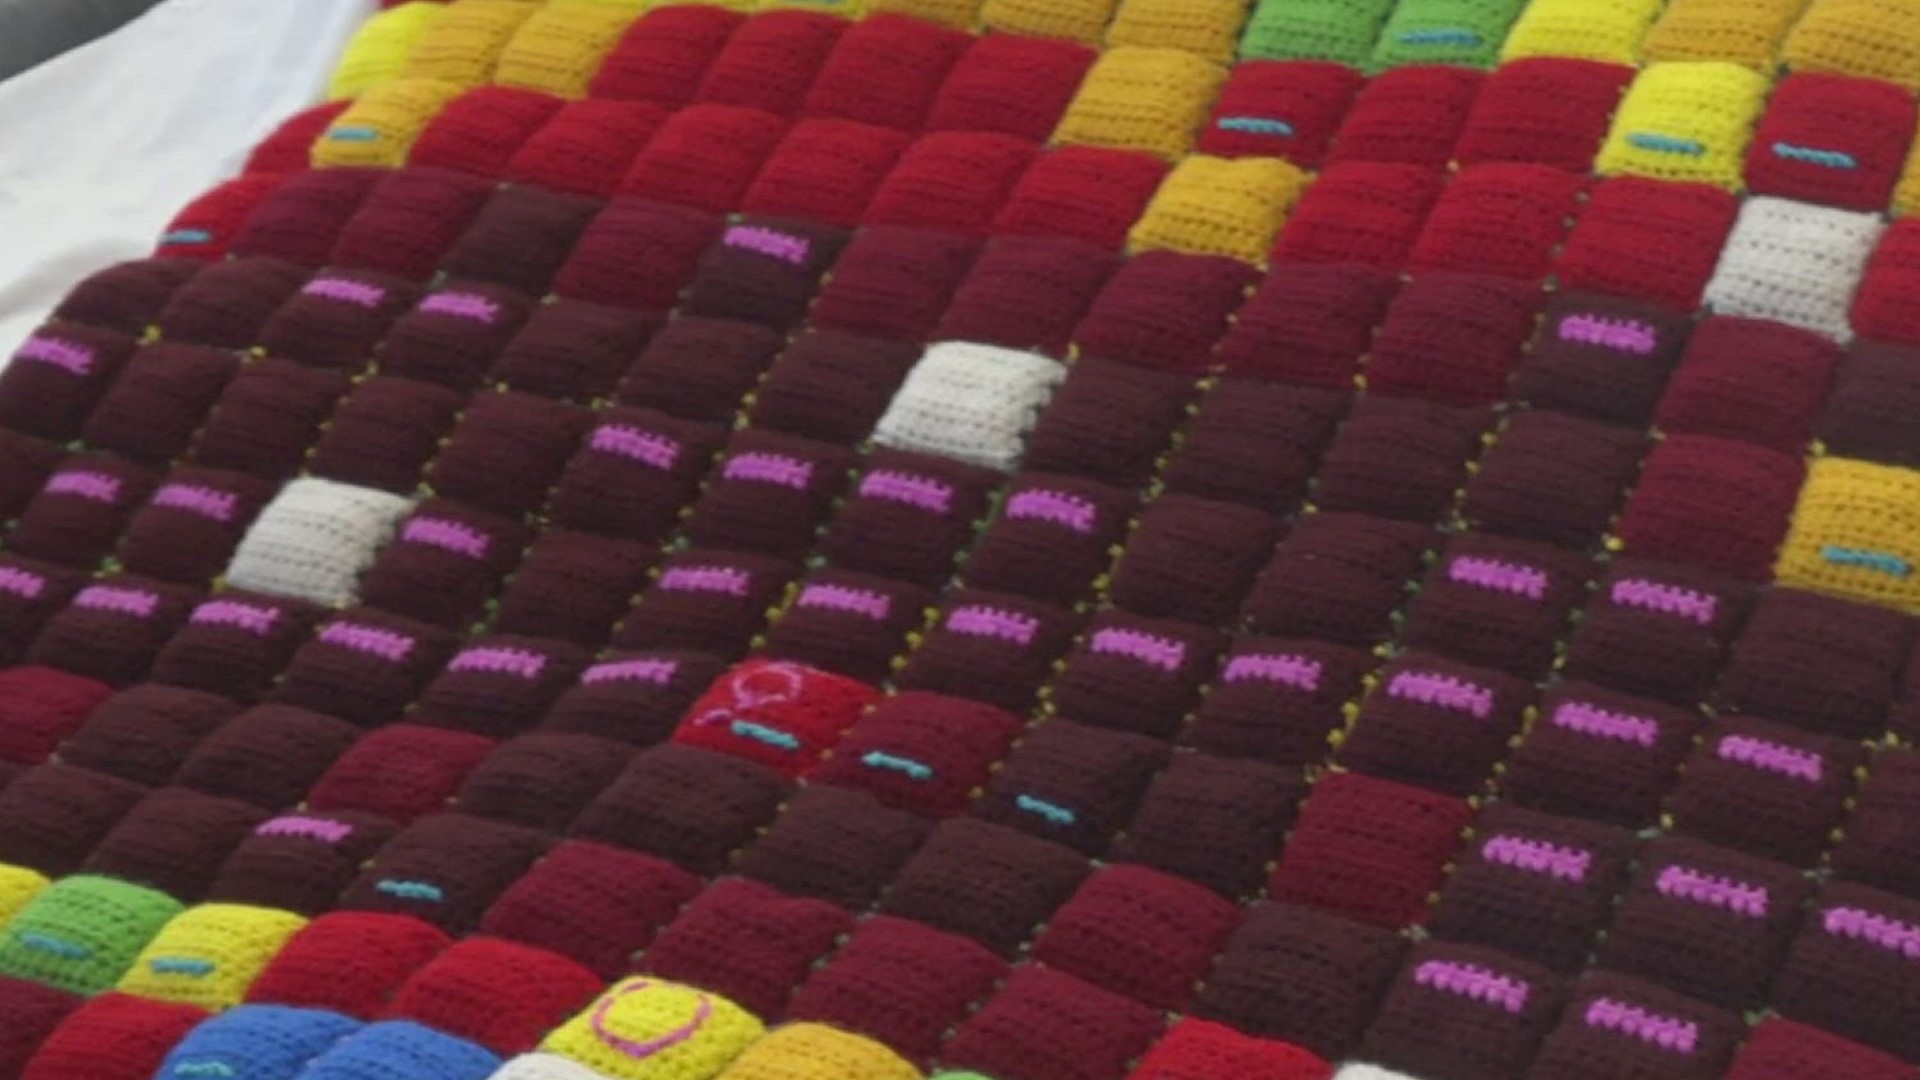 She was inspired to make her own temperature blanket after seeing different variations of it circulating around the online crochet community.